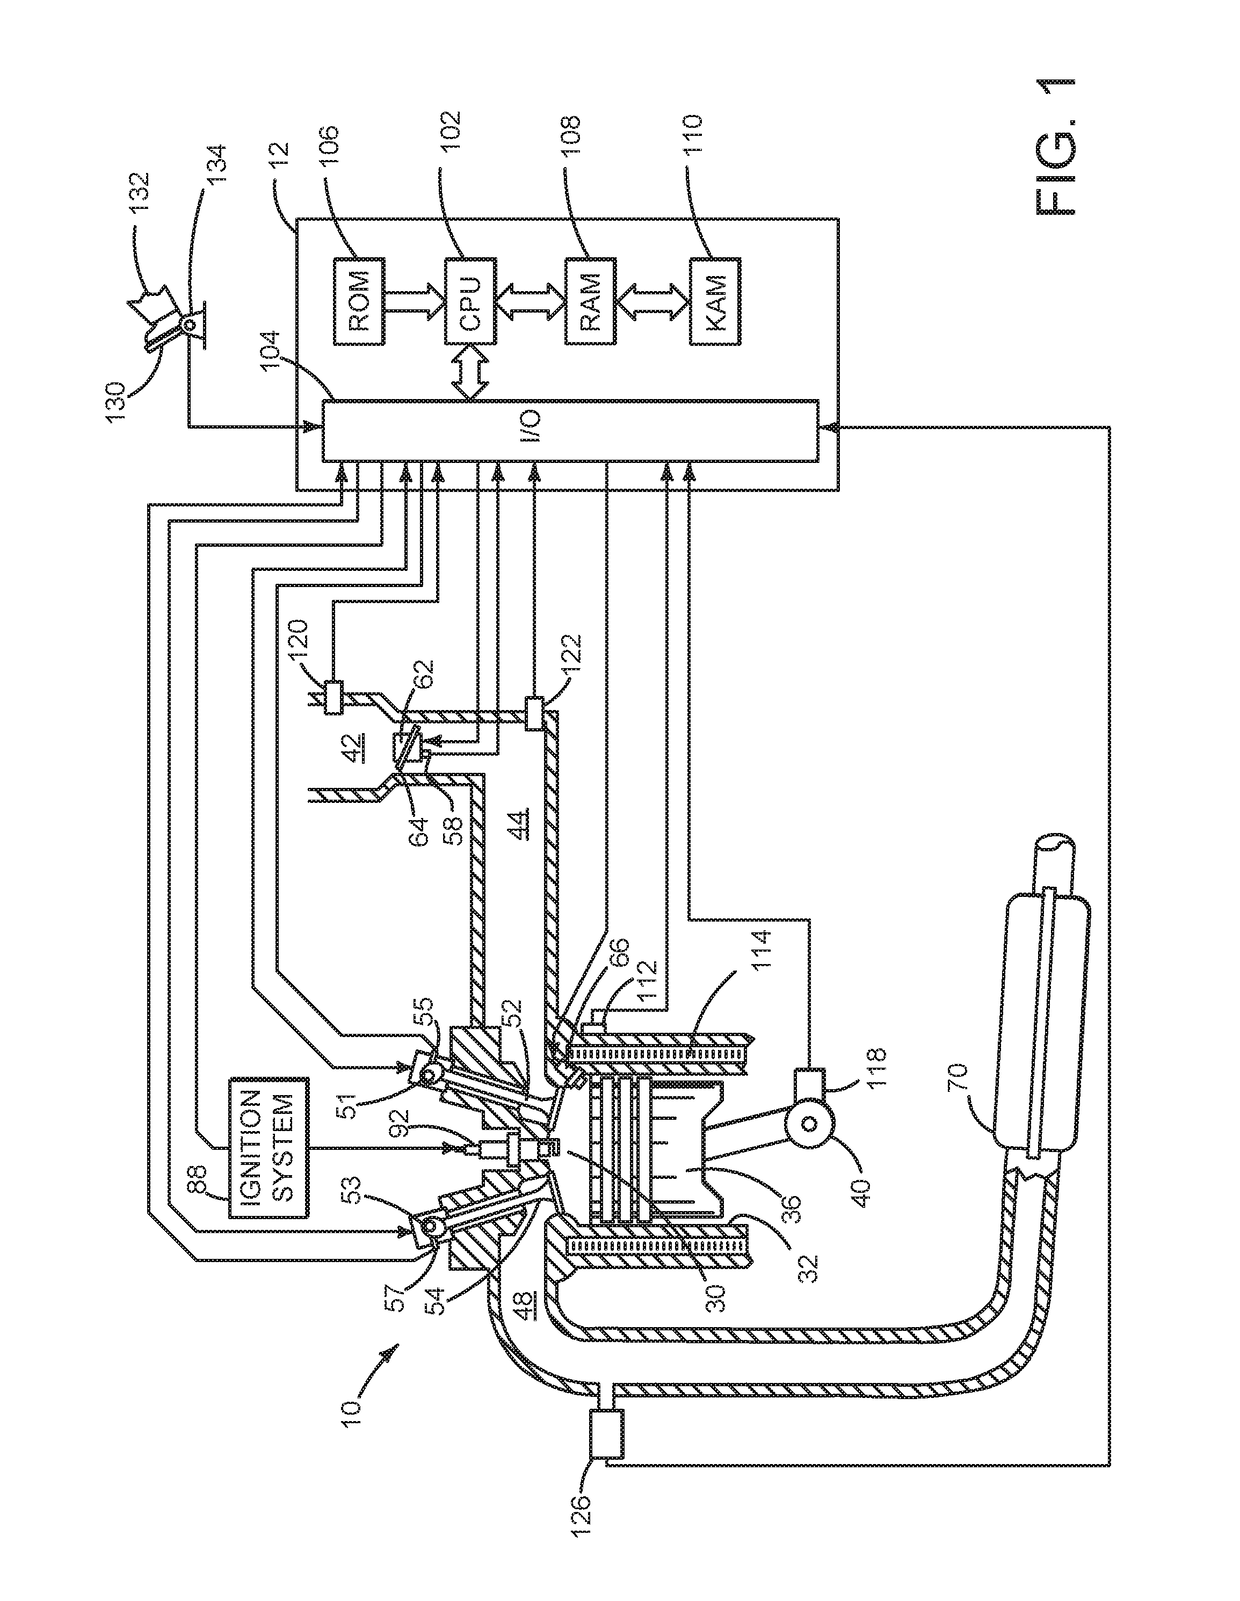 System and method for detecting engine knock and misfire